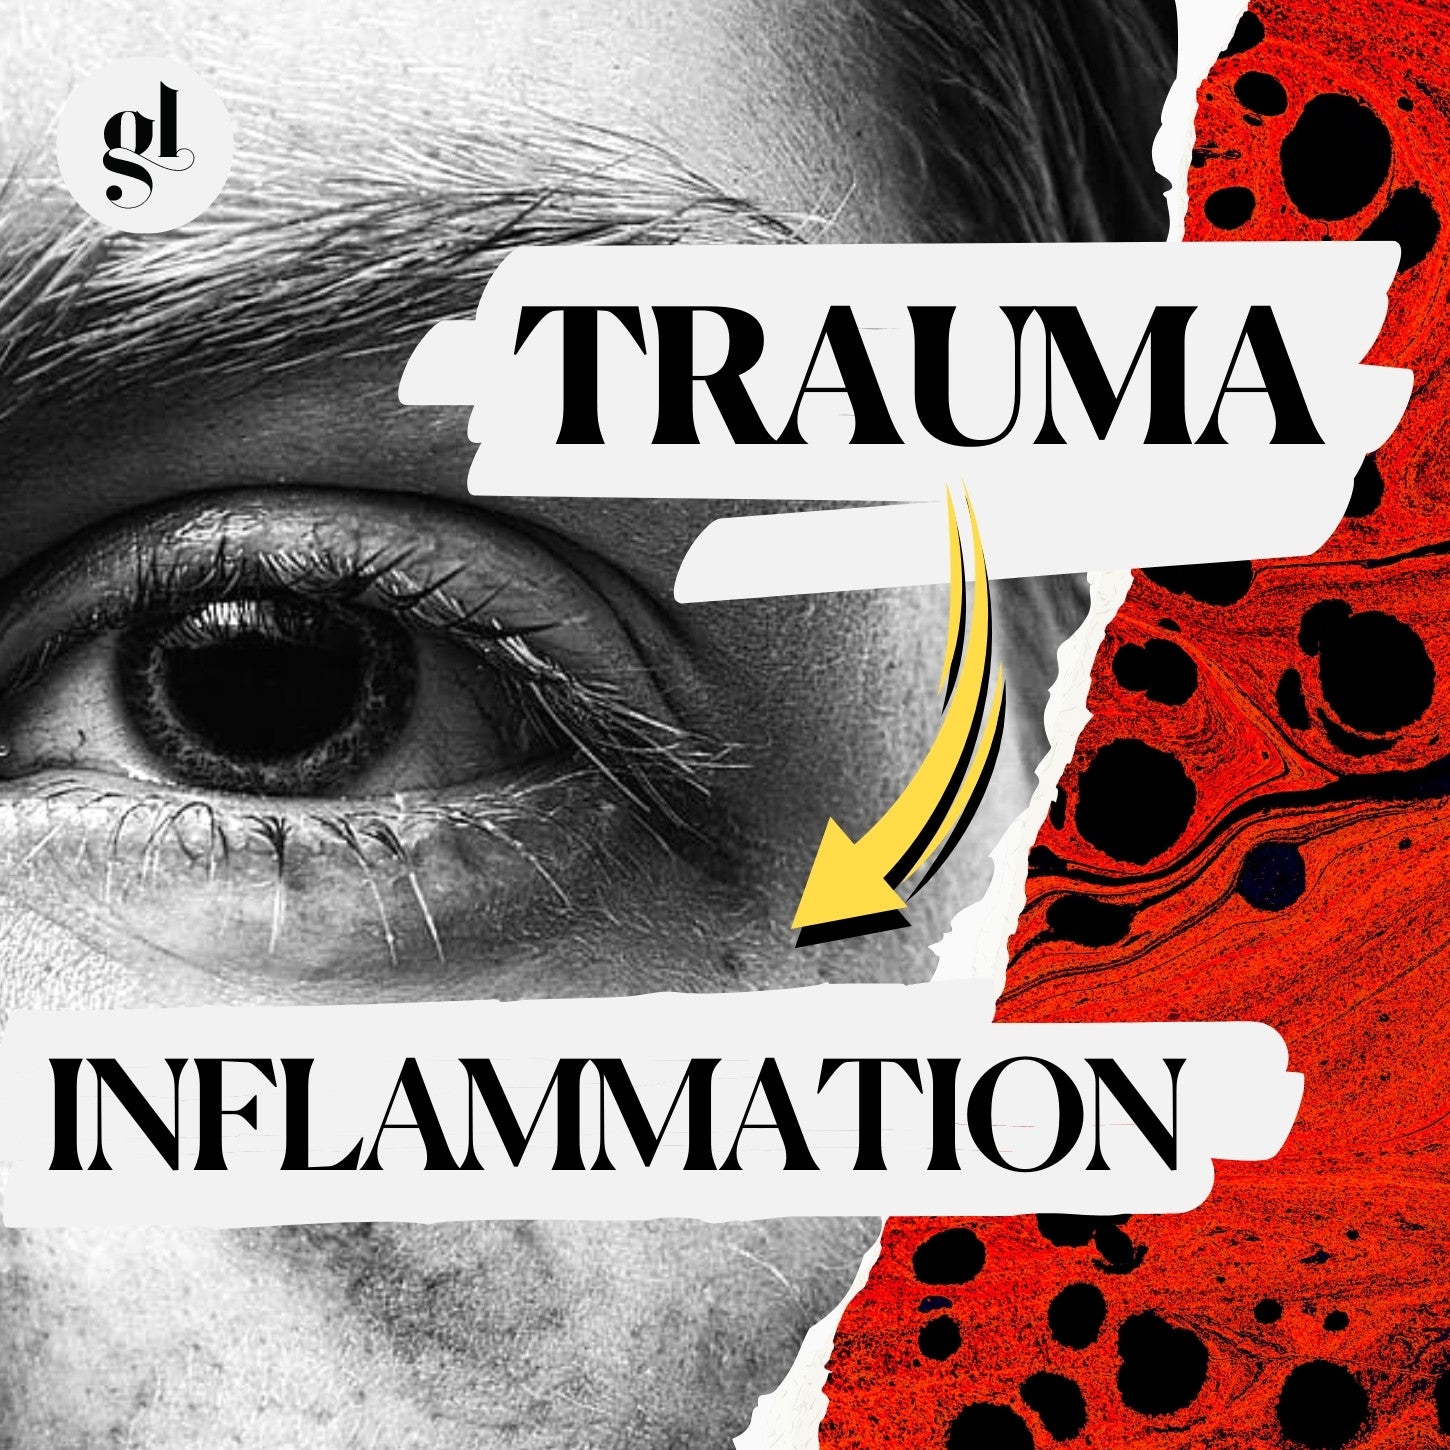 How Trauma Can Lead to Inflammation (And What to Do About it)